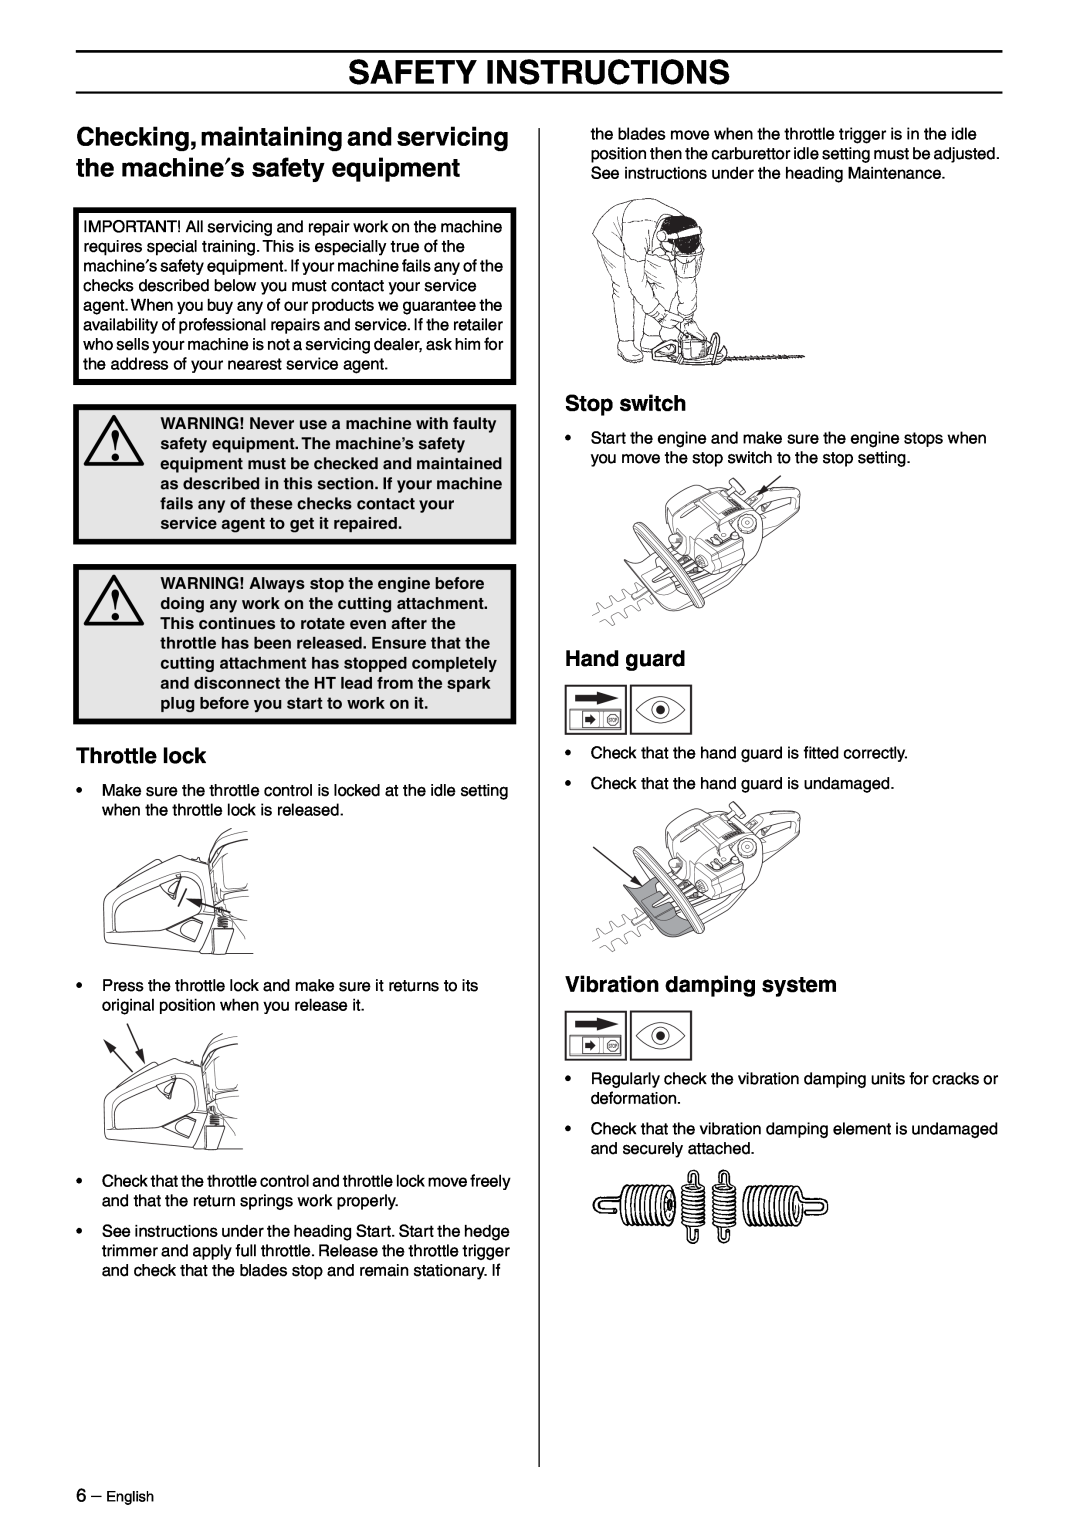 Husqvarna 325HD60, 325HD60X-Series, 325HD75X-Series manual Safety Instructions, WARNING! Never use a machine with faulty 